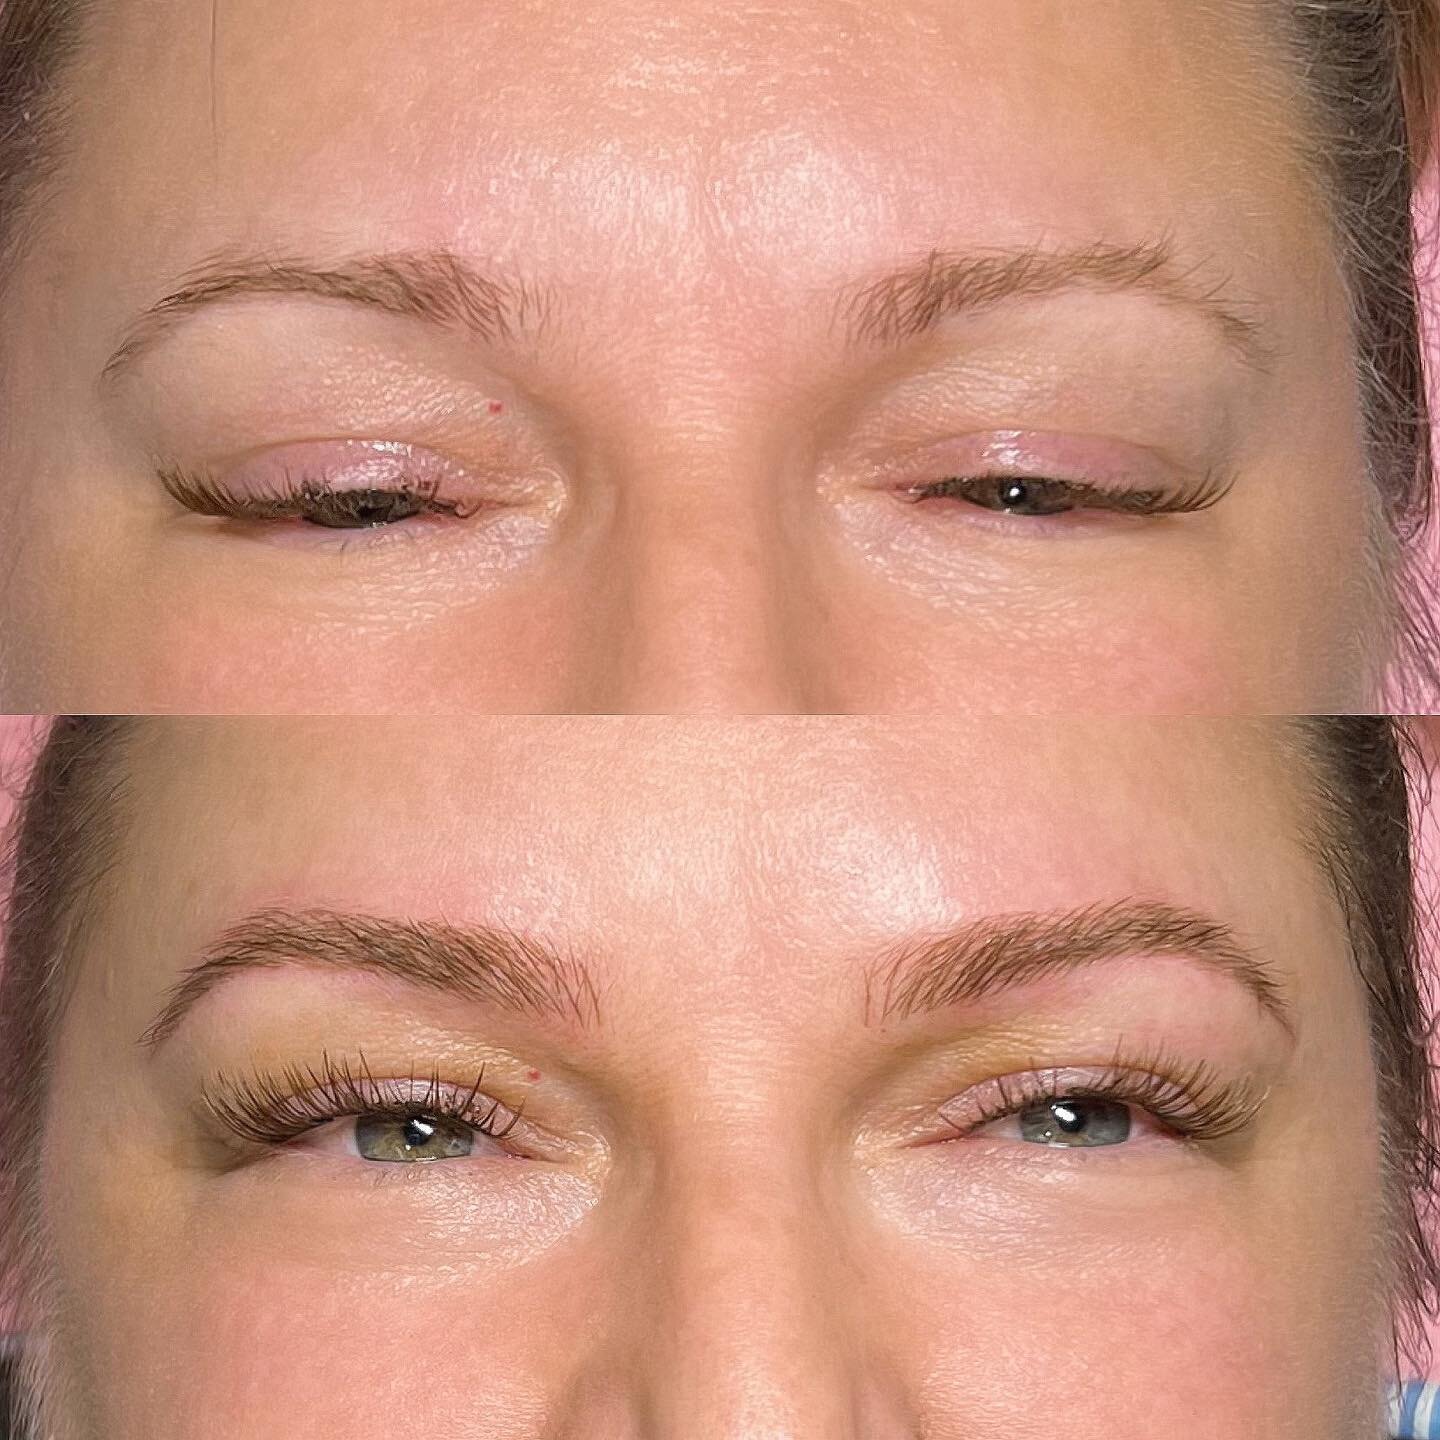 No harsh fronts here! The goal was small and subtle. We call it Microblading but it is truly Nanoblading. The needles in the nanoblades we use have a much smaller diameter to create the thinnest strokes possible. So if a soft natural brow is what you